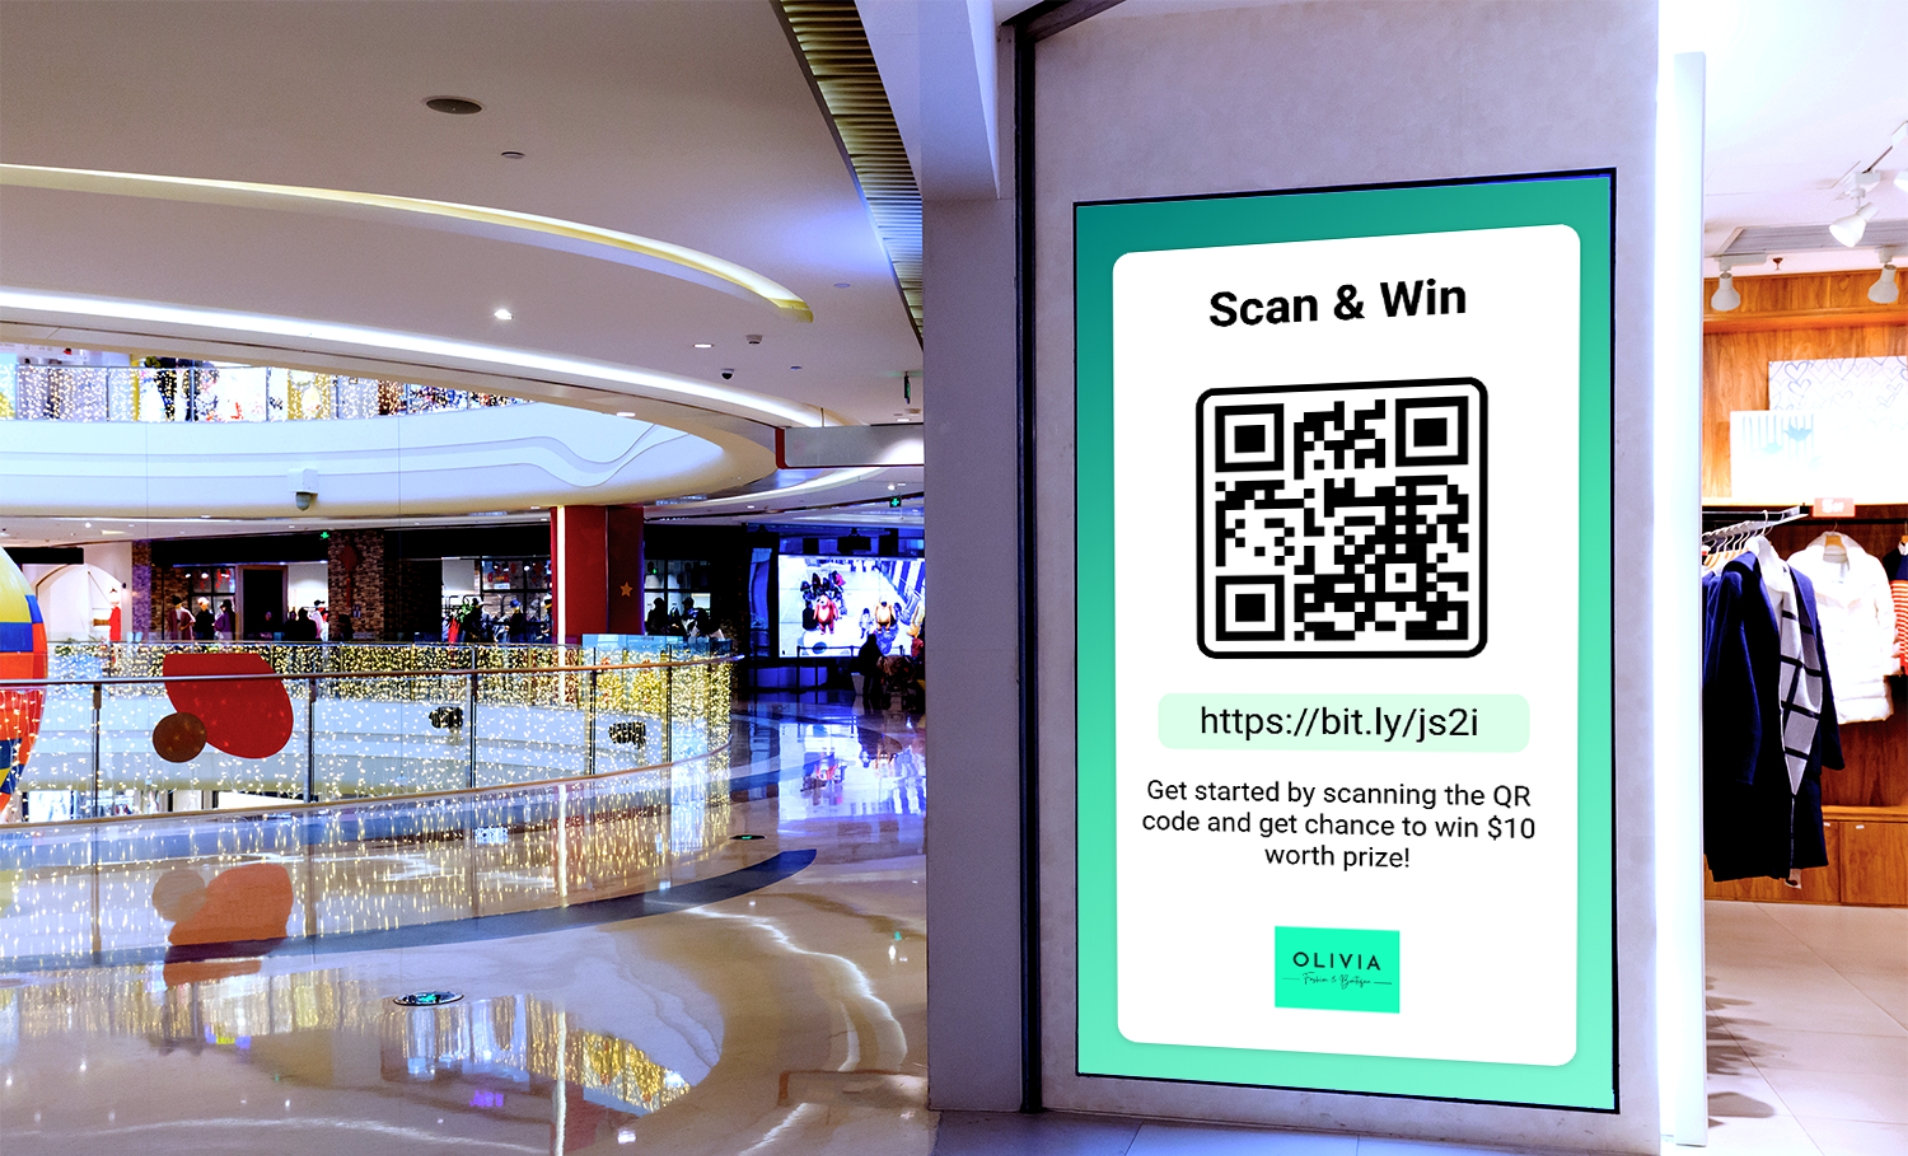 Digital signage screen placed outside retail outlet showing QR code using Pickcel software to get offers from store